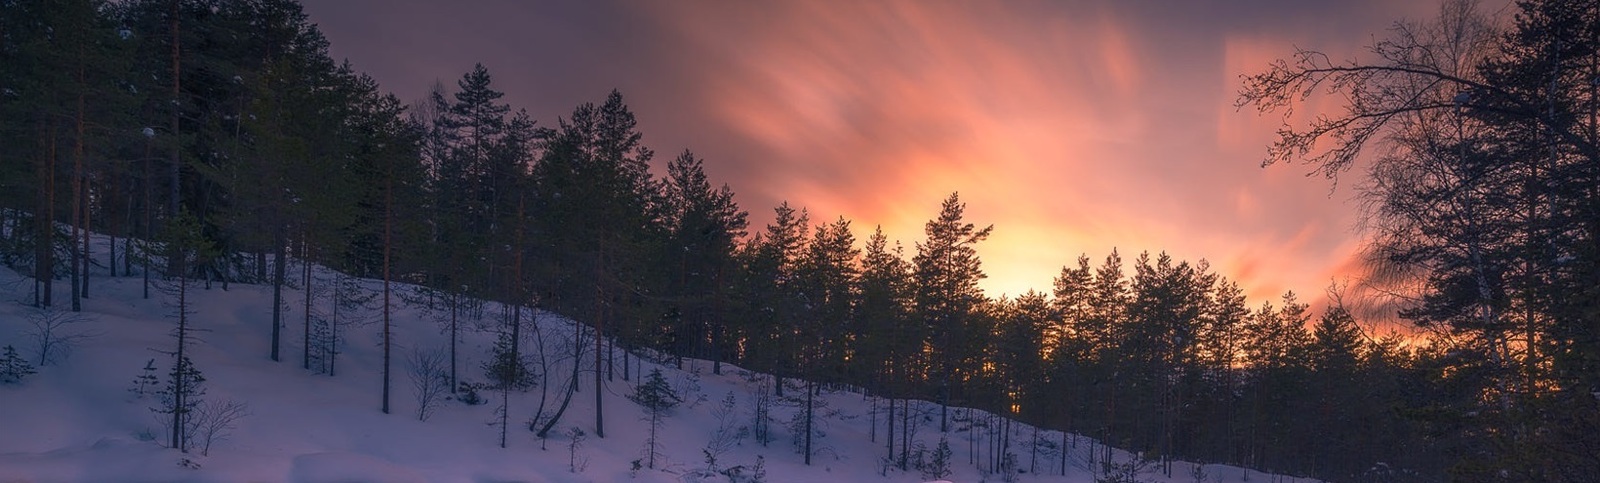 sunset over snow covered trees